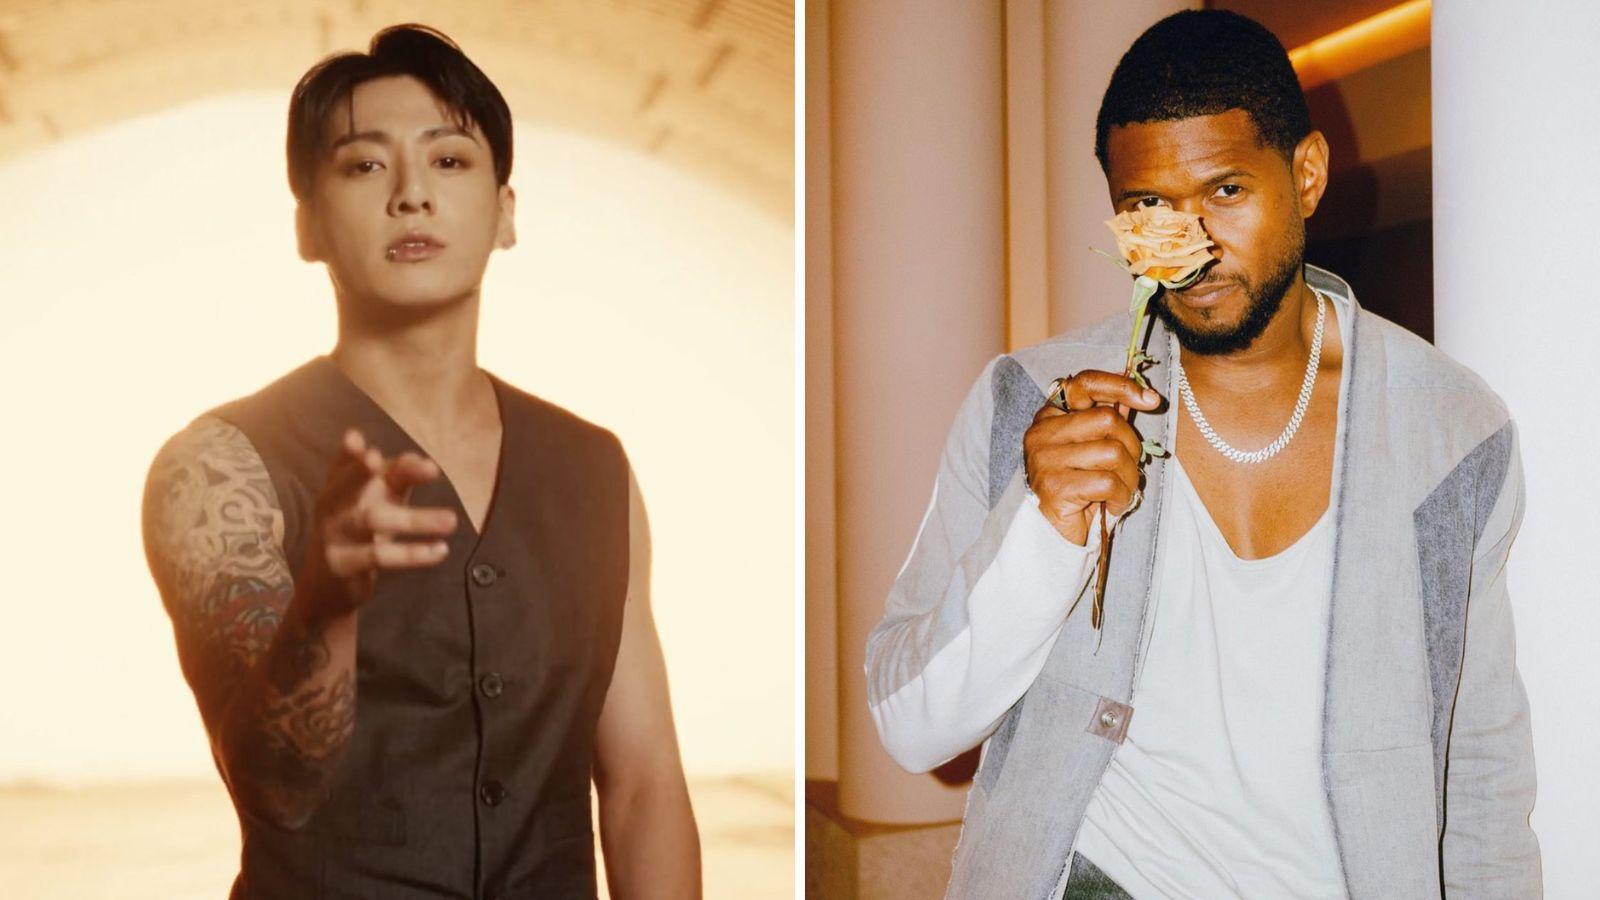 Jungkook debuts new haircut in viral dance video with Usher